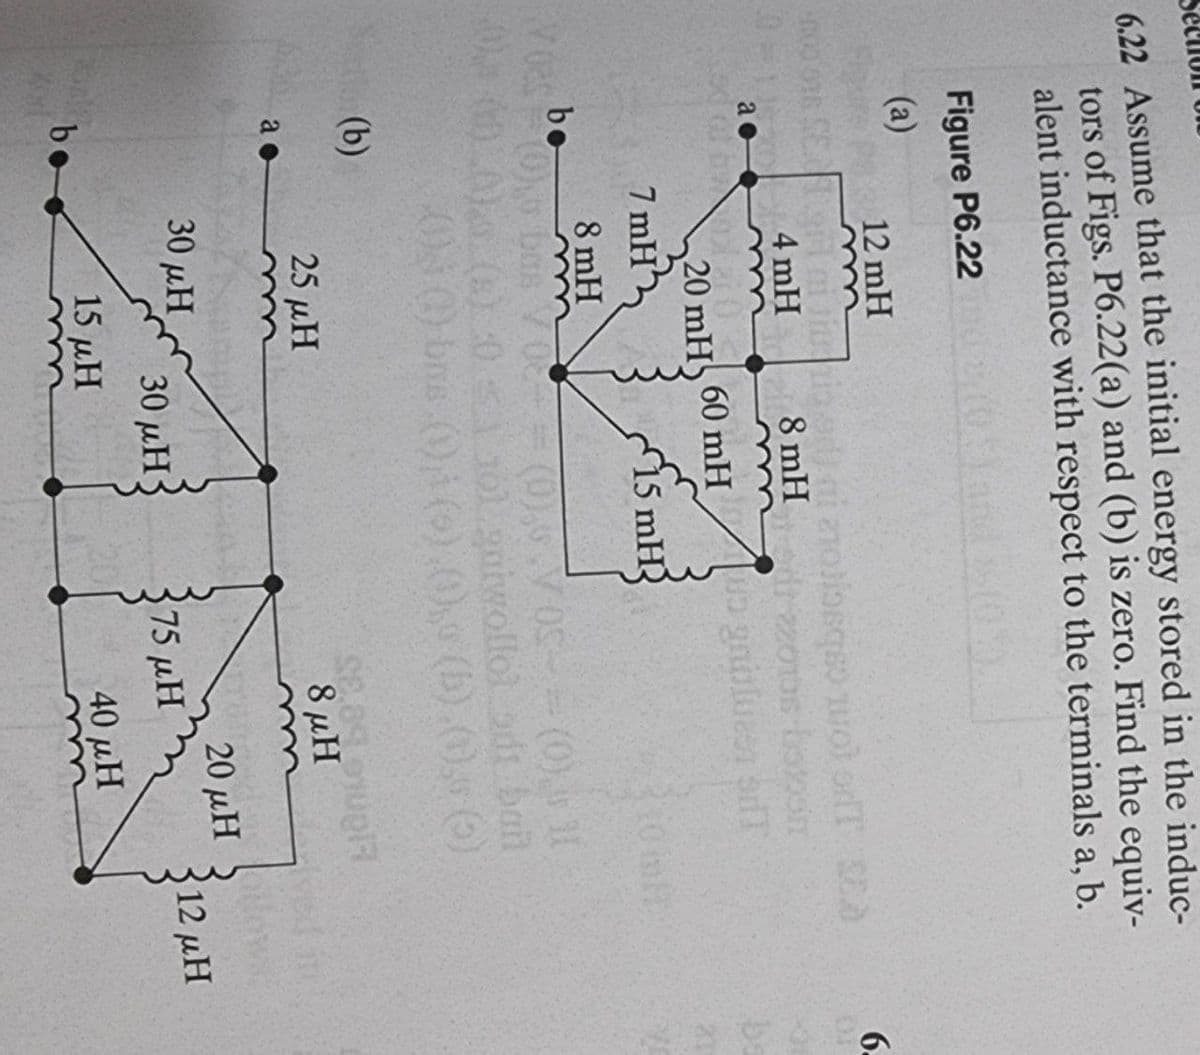 6.22 Assume that the initial energy stored in the induc-
tors of Figs. P6.22(a) and (b) is zero. Find the equiv-
alent inductance with respect to the terminals a, b.
Figure P6.22
(a)
12 mH
6-
4 mH
8 mH oos boom
a o
20 mH 60 mн
7 mH
15 mH
8 mH
be
(0)o bos V 0
(0),6.V0S--(0). f
201.9niwollo adt ban
0N0) bns (04 (o).0,0 (b).0.9 ()
(b)
25 μΗ
8 μΗ
ved in
Nows
30 pH30 uH
20 μΗ
30 μΗ 3
75 μΗ
12 μΗ
be
15 μΗ
40 µH
